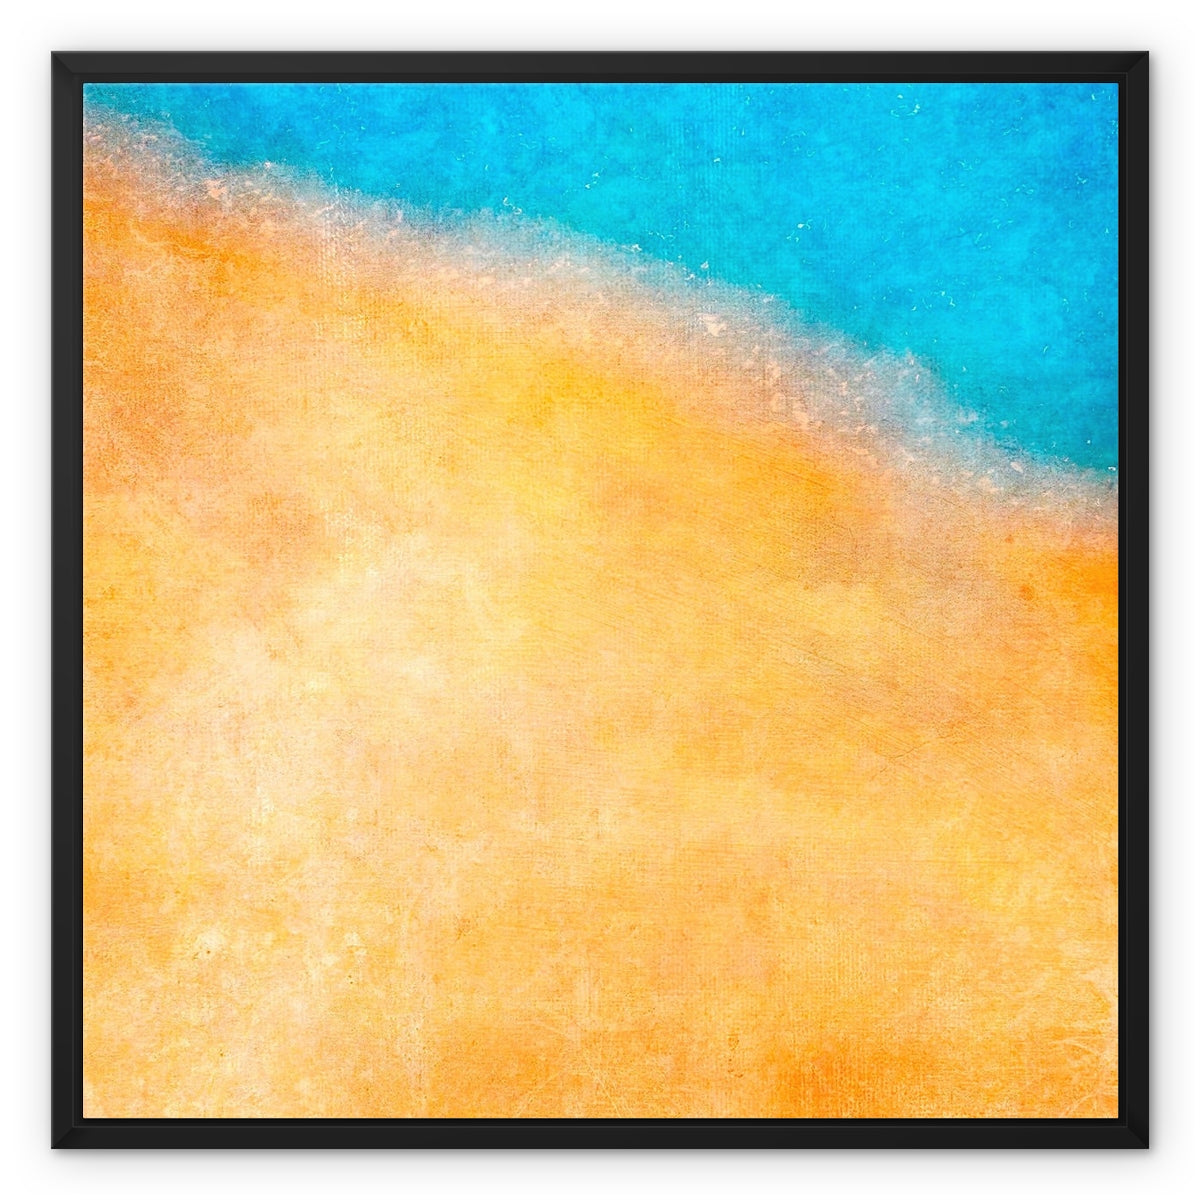 The Shoreline Abstract Painting | Framed Canvas From Scotland-Floating Framed Canvas Prints-Abstract & Impressionistic Art Gallery-24"x24"-Paintings, Prints, Homeware, Art Gifts From Scotland By Scottish Artist Kevin Hunter